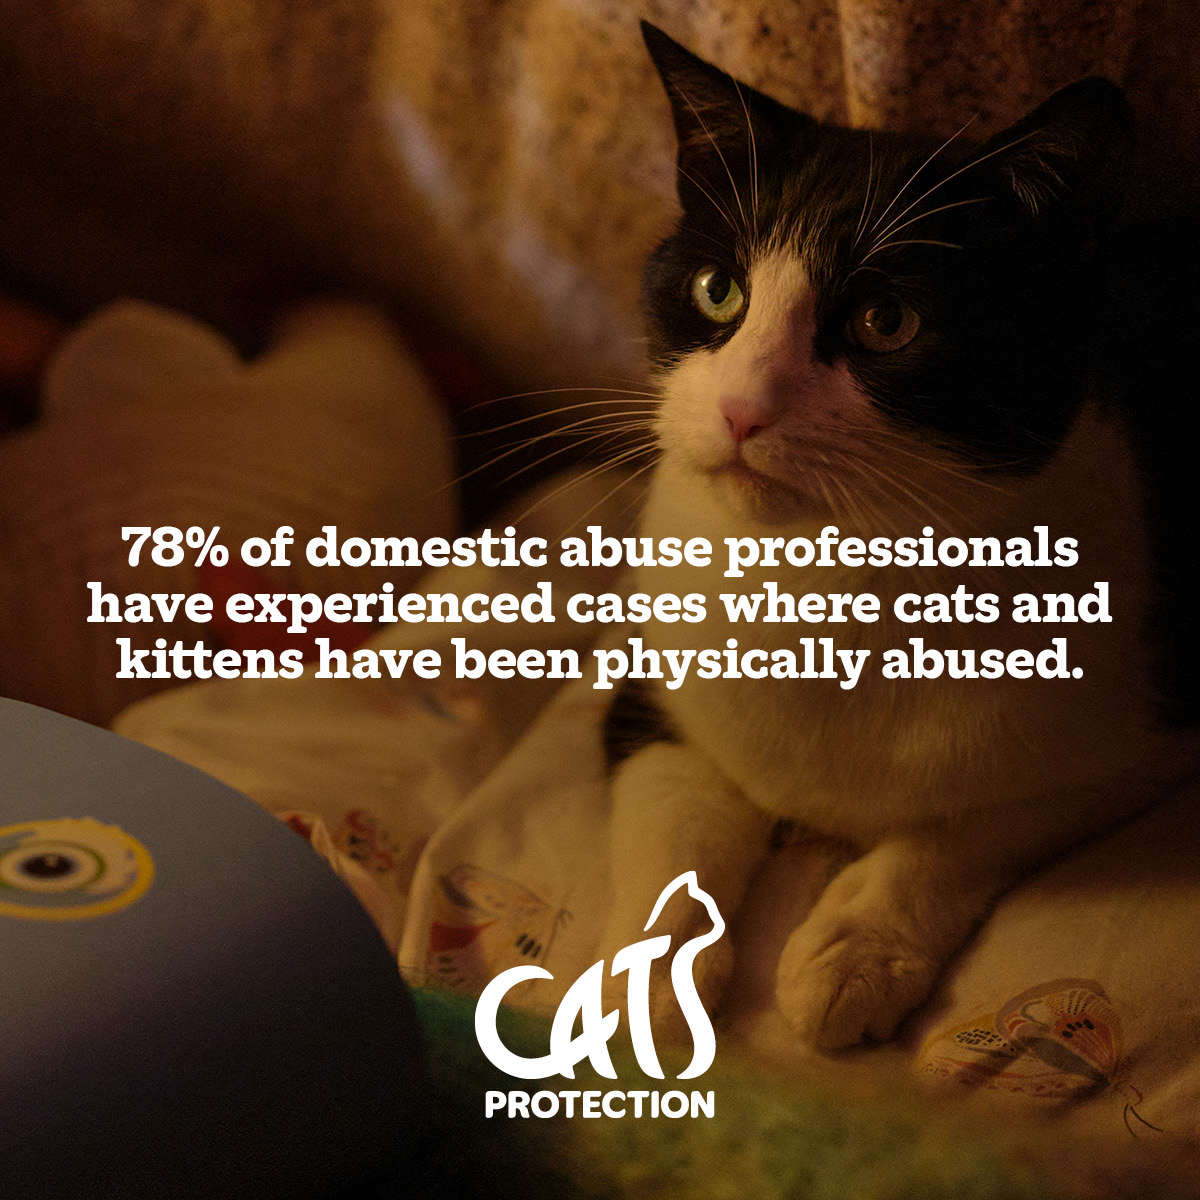 Pets can also suffer at the hands of #DomesticAbuse perpetrators. Cats Protection's Lifeline service provides temporary homes for cats affected by domestic abuse, allowing their owners to get to safety. cats.org.uk/together #DomesticAbuseSupport